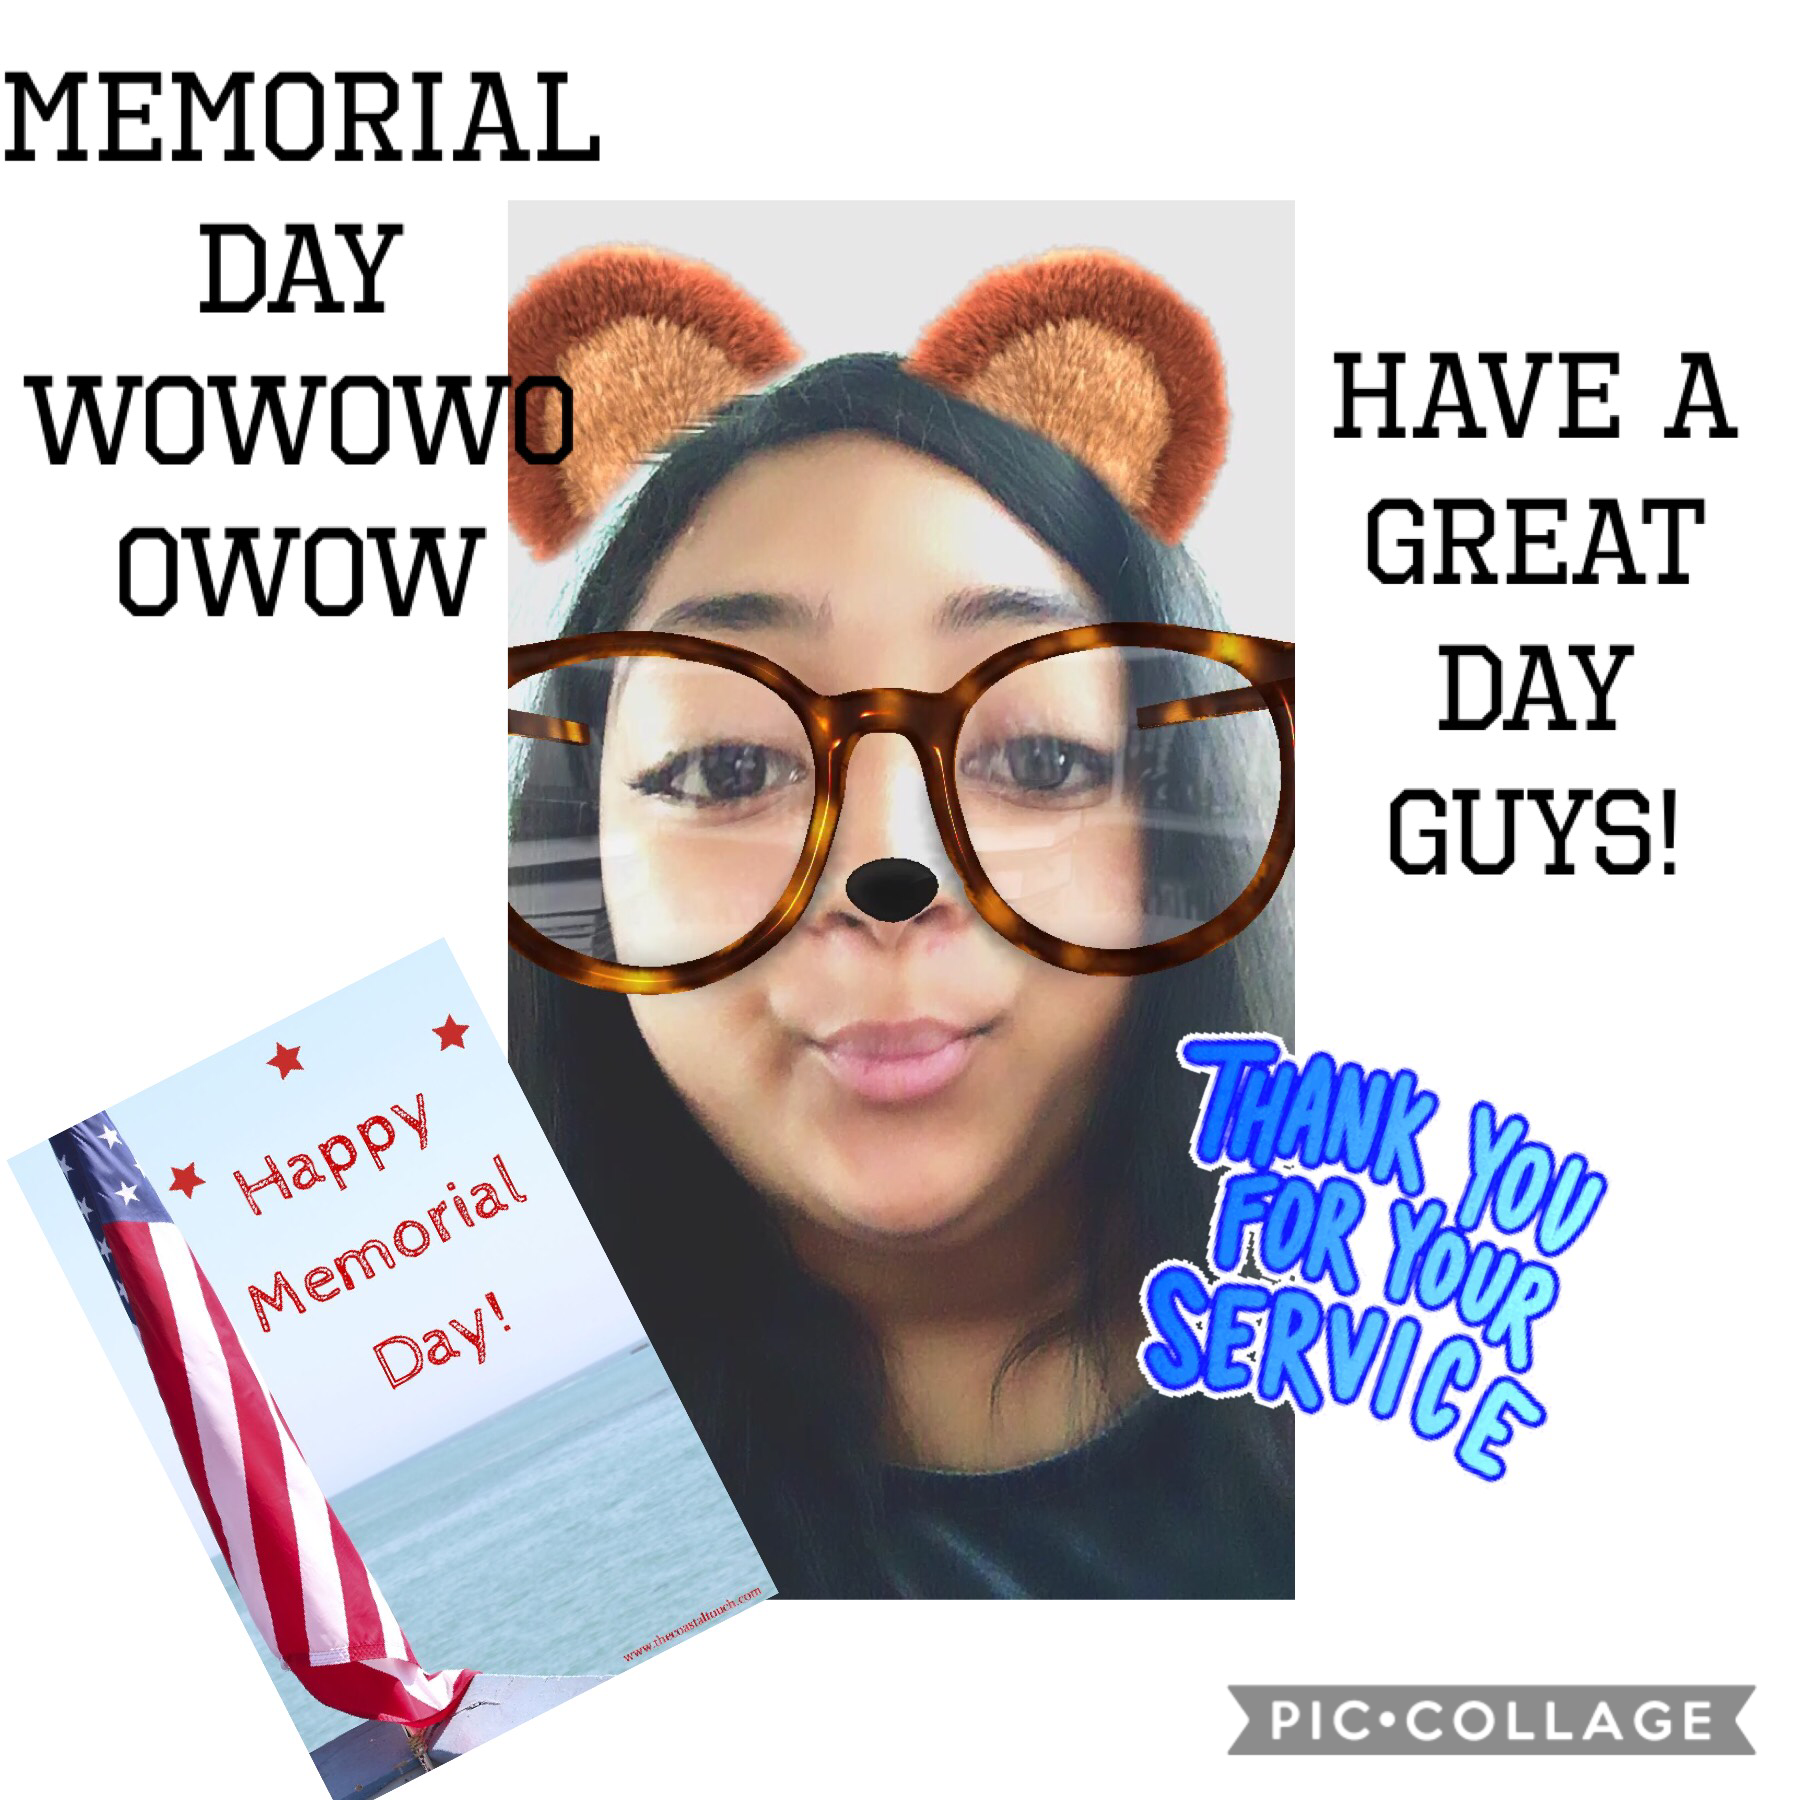 Love you guys!!! Have a great day!!! Thanks you for all the service that people have or are doing!🥰😝😆😘☺️😊🤗